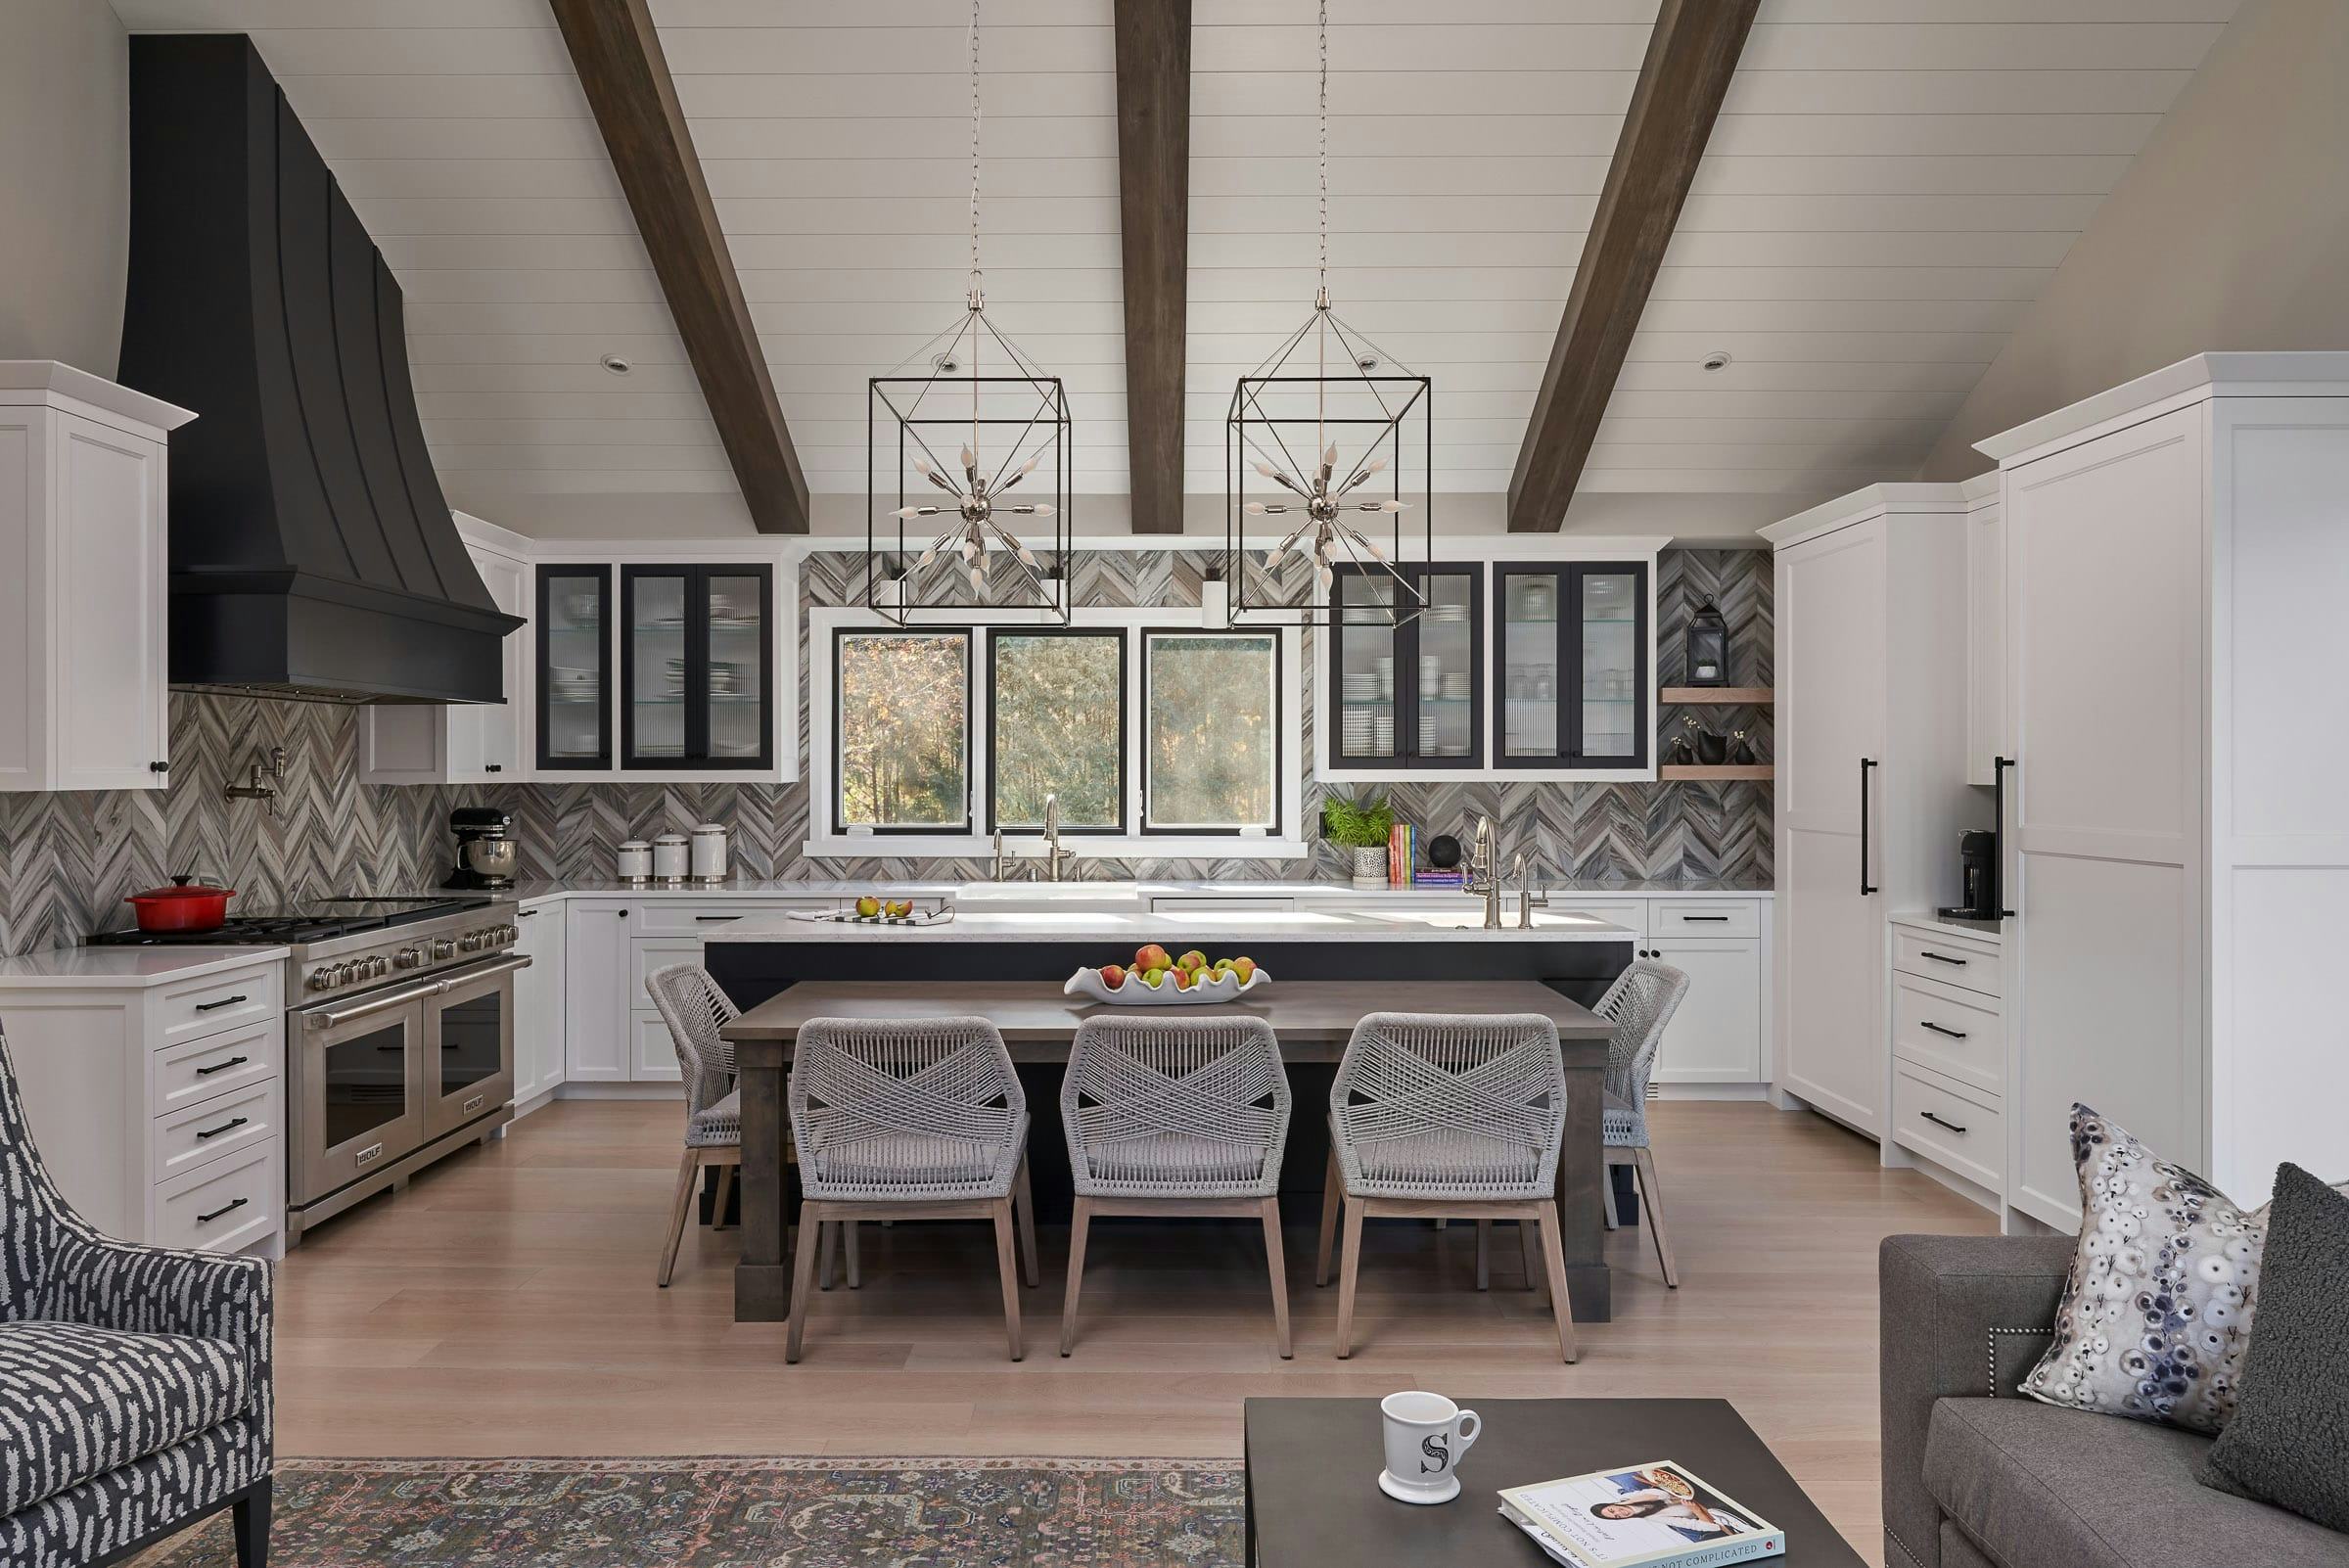 black and white kitchen with vaulted ceilings, kitchen table